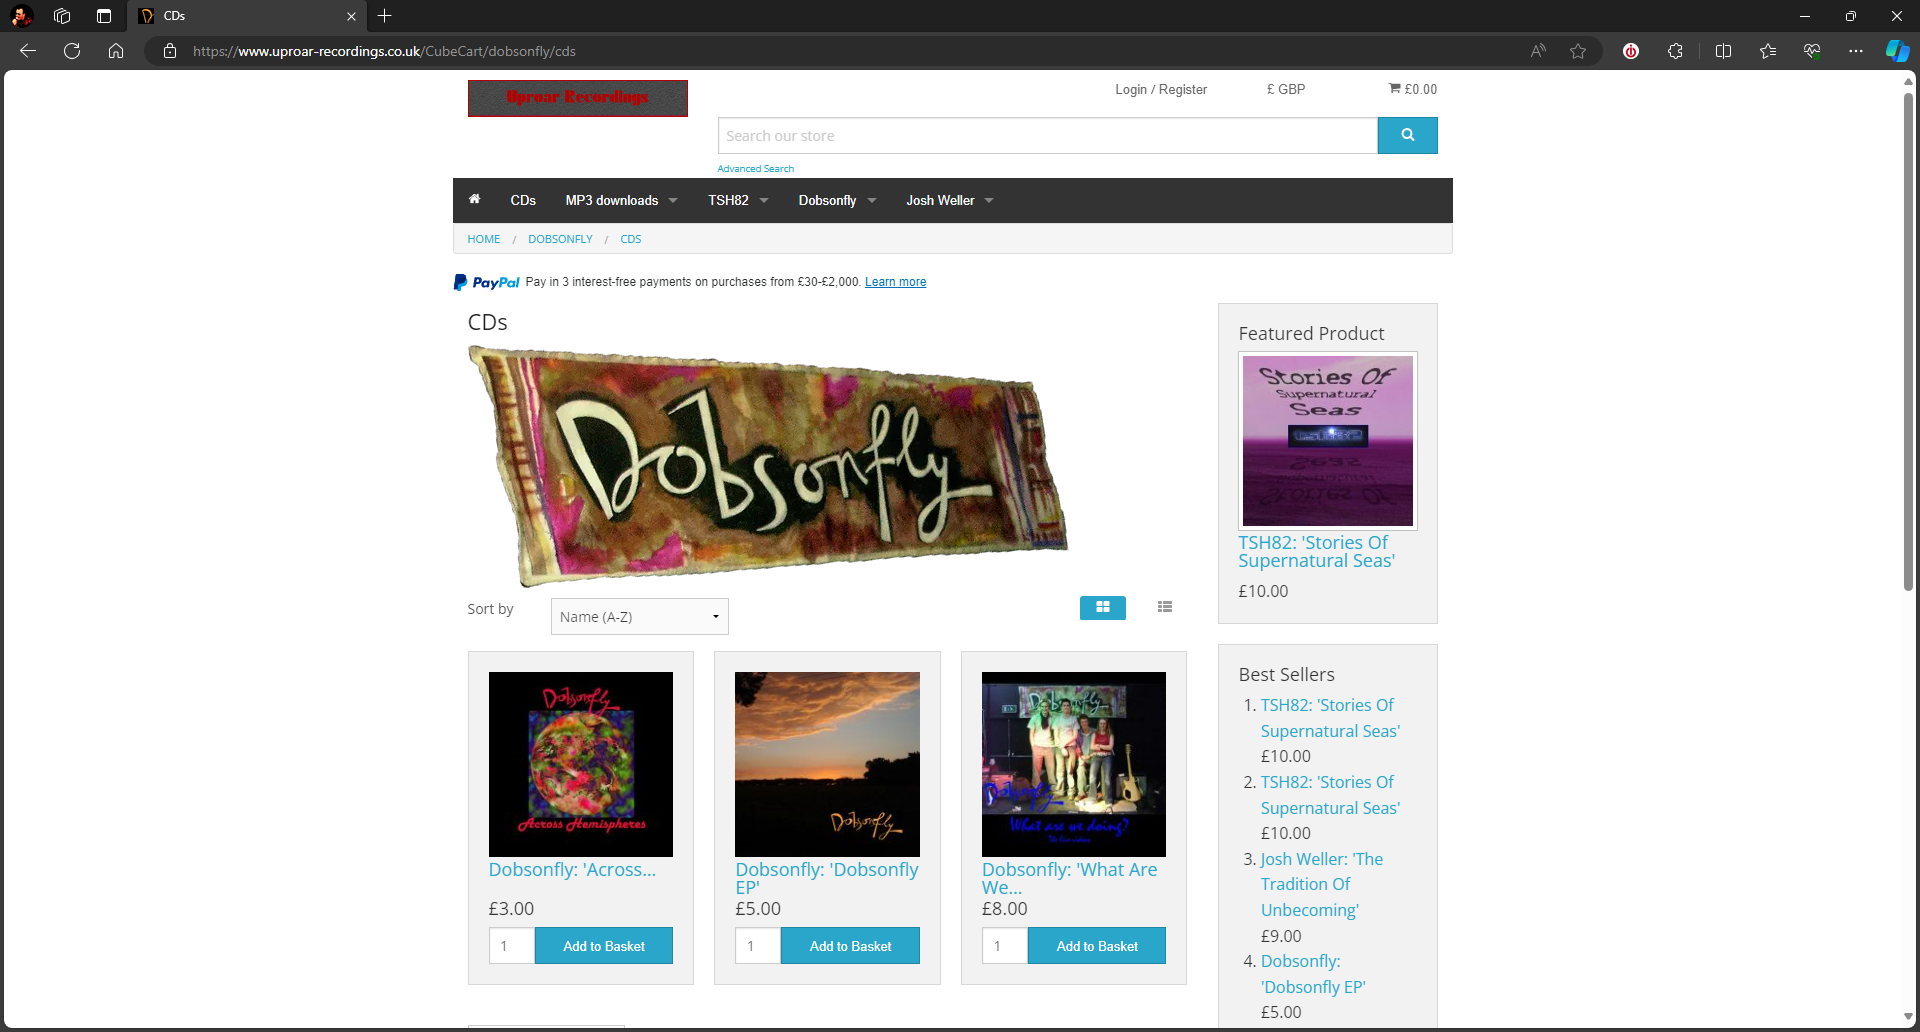 Image of and link to the Dobsonfly online storefront hosted by Uproar Recordings